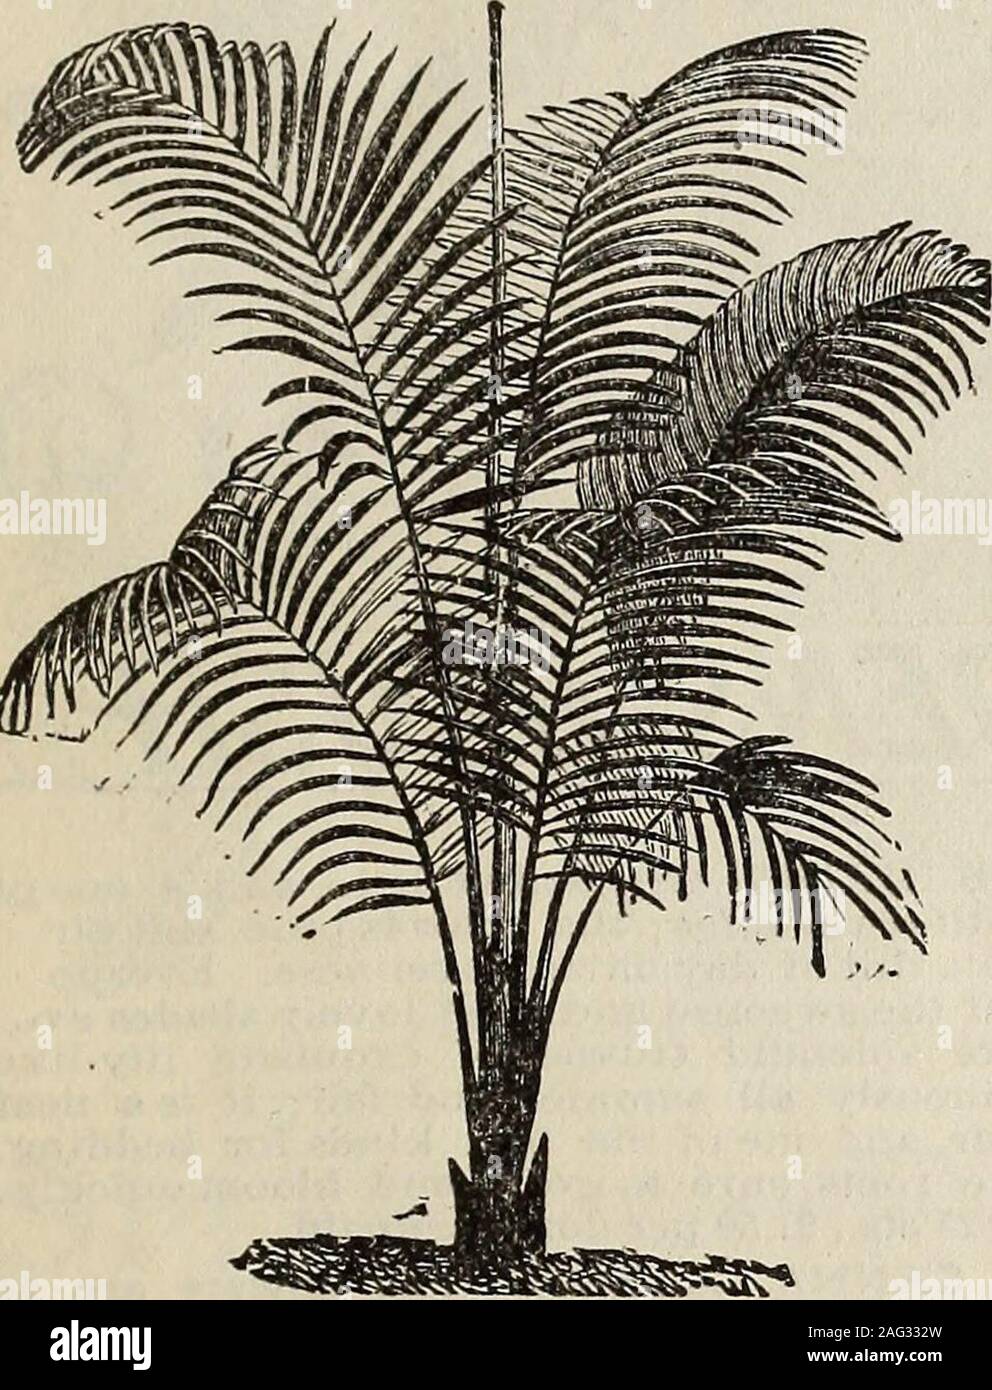 . New floral guide : 1899 plain abridged edition. eeu,elegantly fringed with white threads; grows easily, needs no petting or coaxing. NOTE.—All our palms arc good, sturdy plants, suitable for win-dow and table decorations; they are handsome now and will growmore beautiful for years. Good plants, J 2 inches and over, 4 to 5fronds, J 5, 20 and 25 cts. each, postpaid. Extra size, 18 incheshigh, with character leaves, 50 cts. each, by express. COCOS WEDDELLIANA^ This is one of themost elegant and grace-ful of all the smallerpalms ; its slender, erectstem is freely furnishedwith its graceful archi Stock Photo